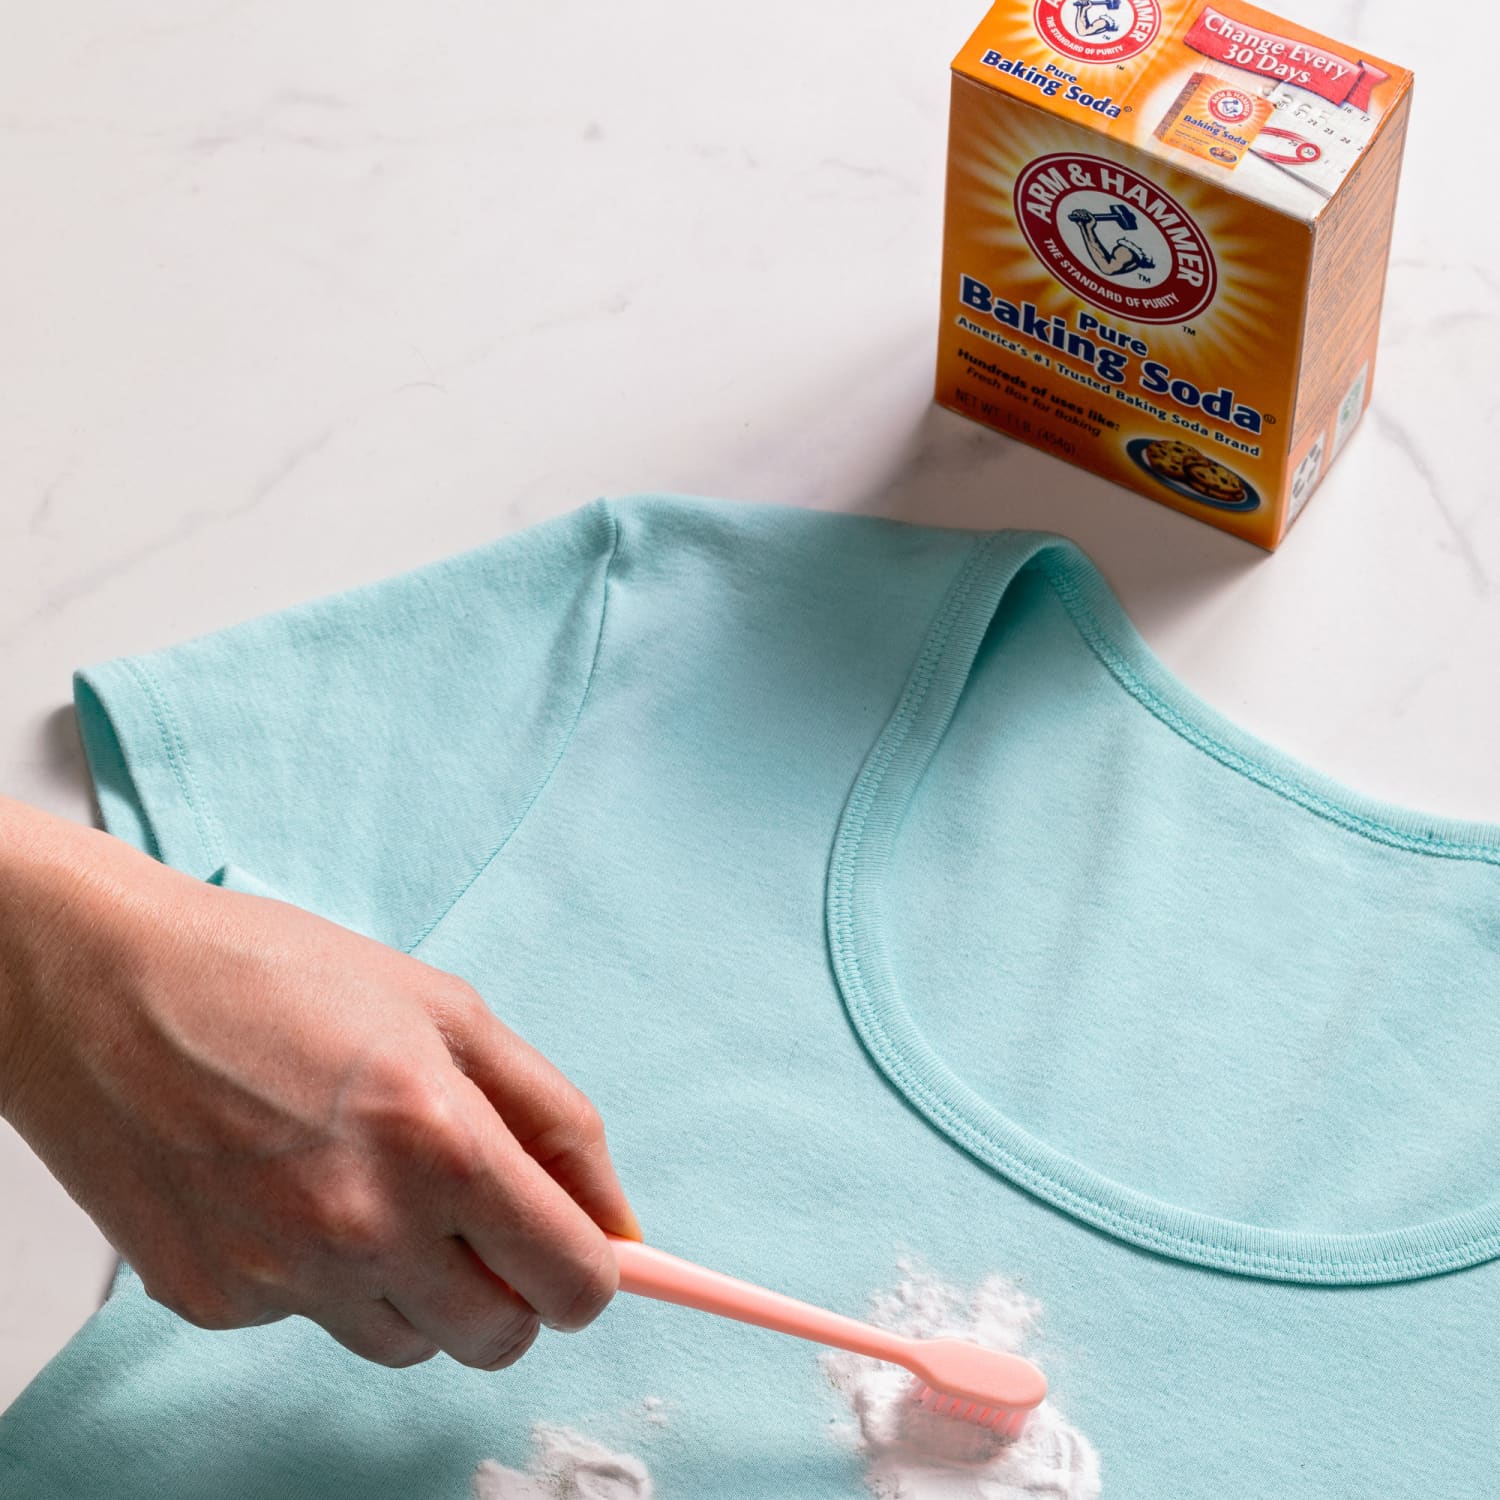 Here's How to Get Oil and Grease Stains Out of Your Clothes